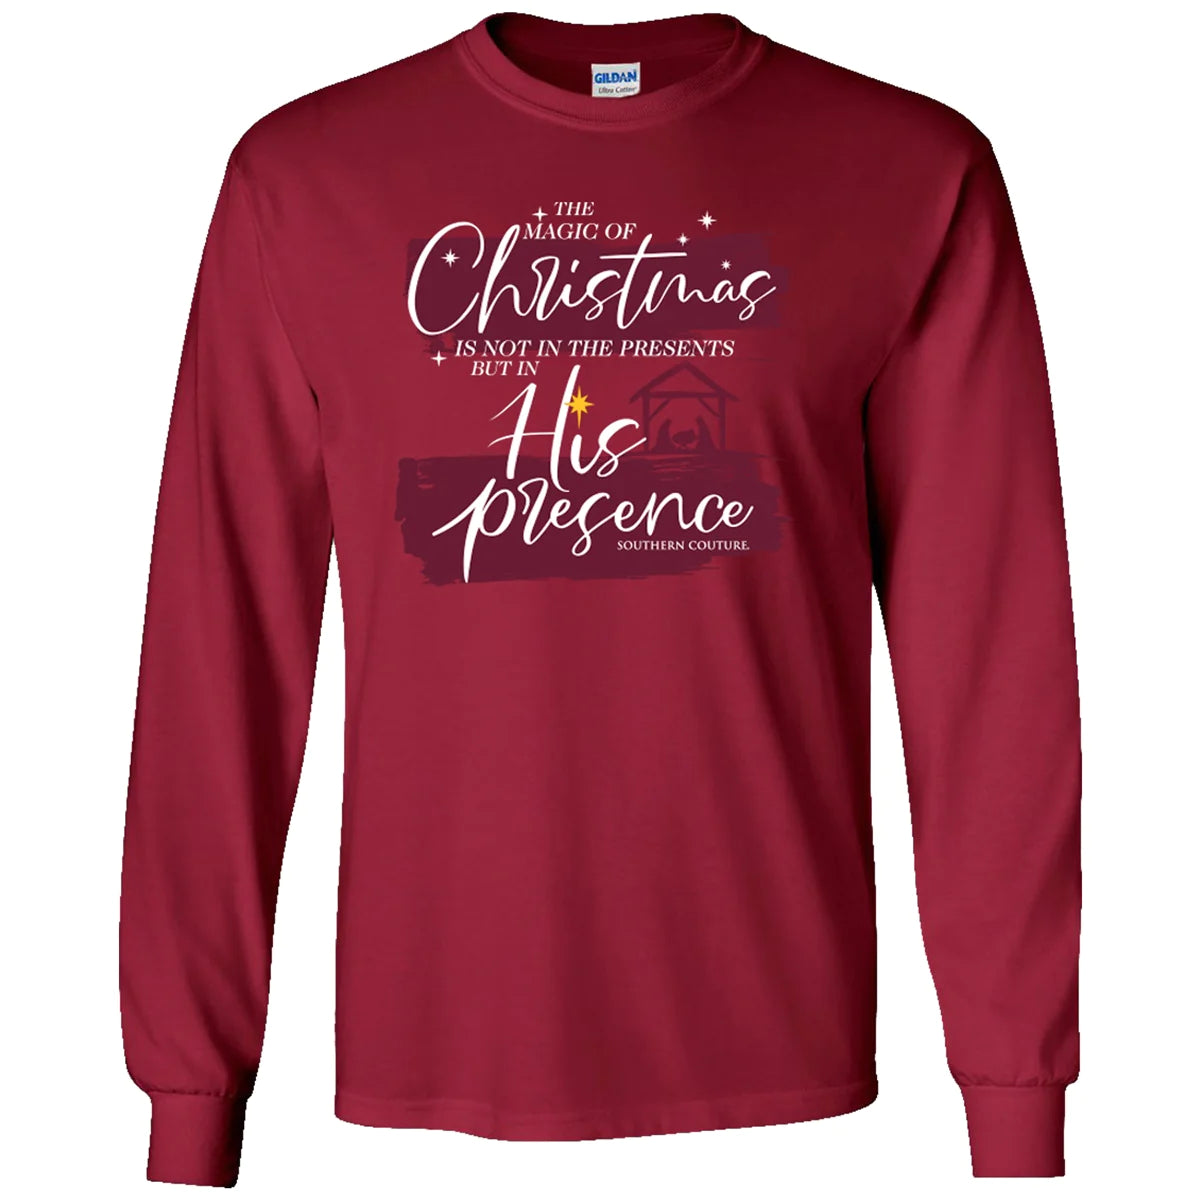 SOUTHERN COUTURE MAGIC OF CHRISTMAS SOFT LONG SLEEVE T-SHIRT